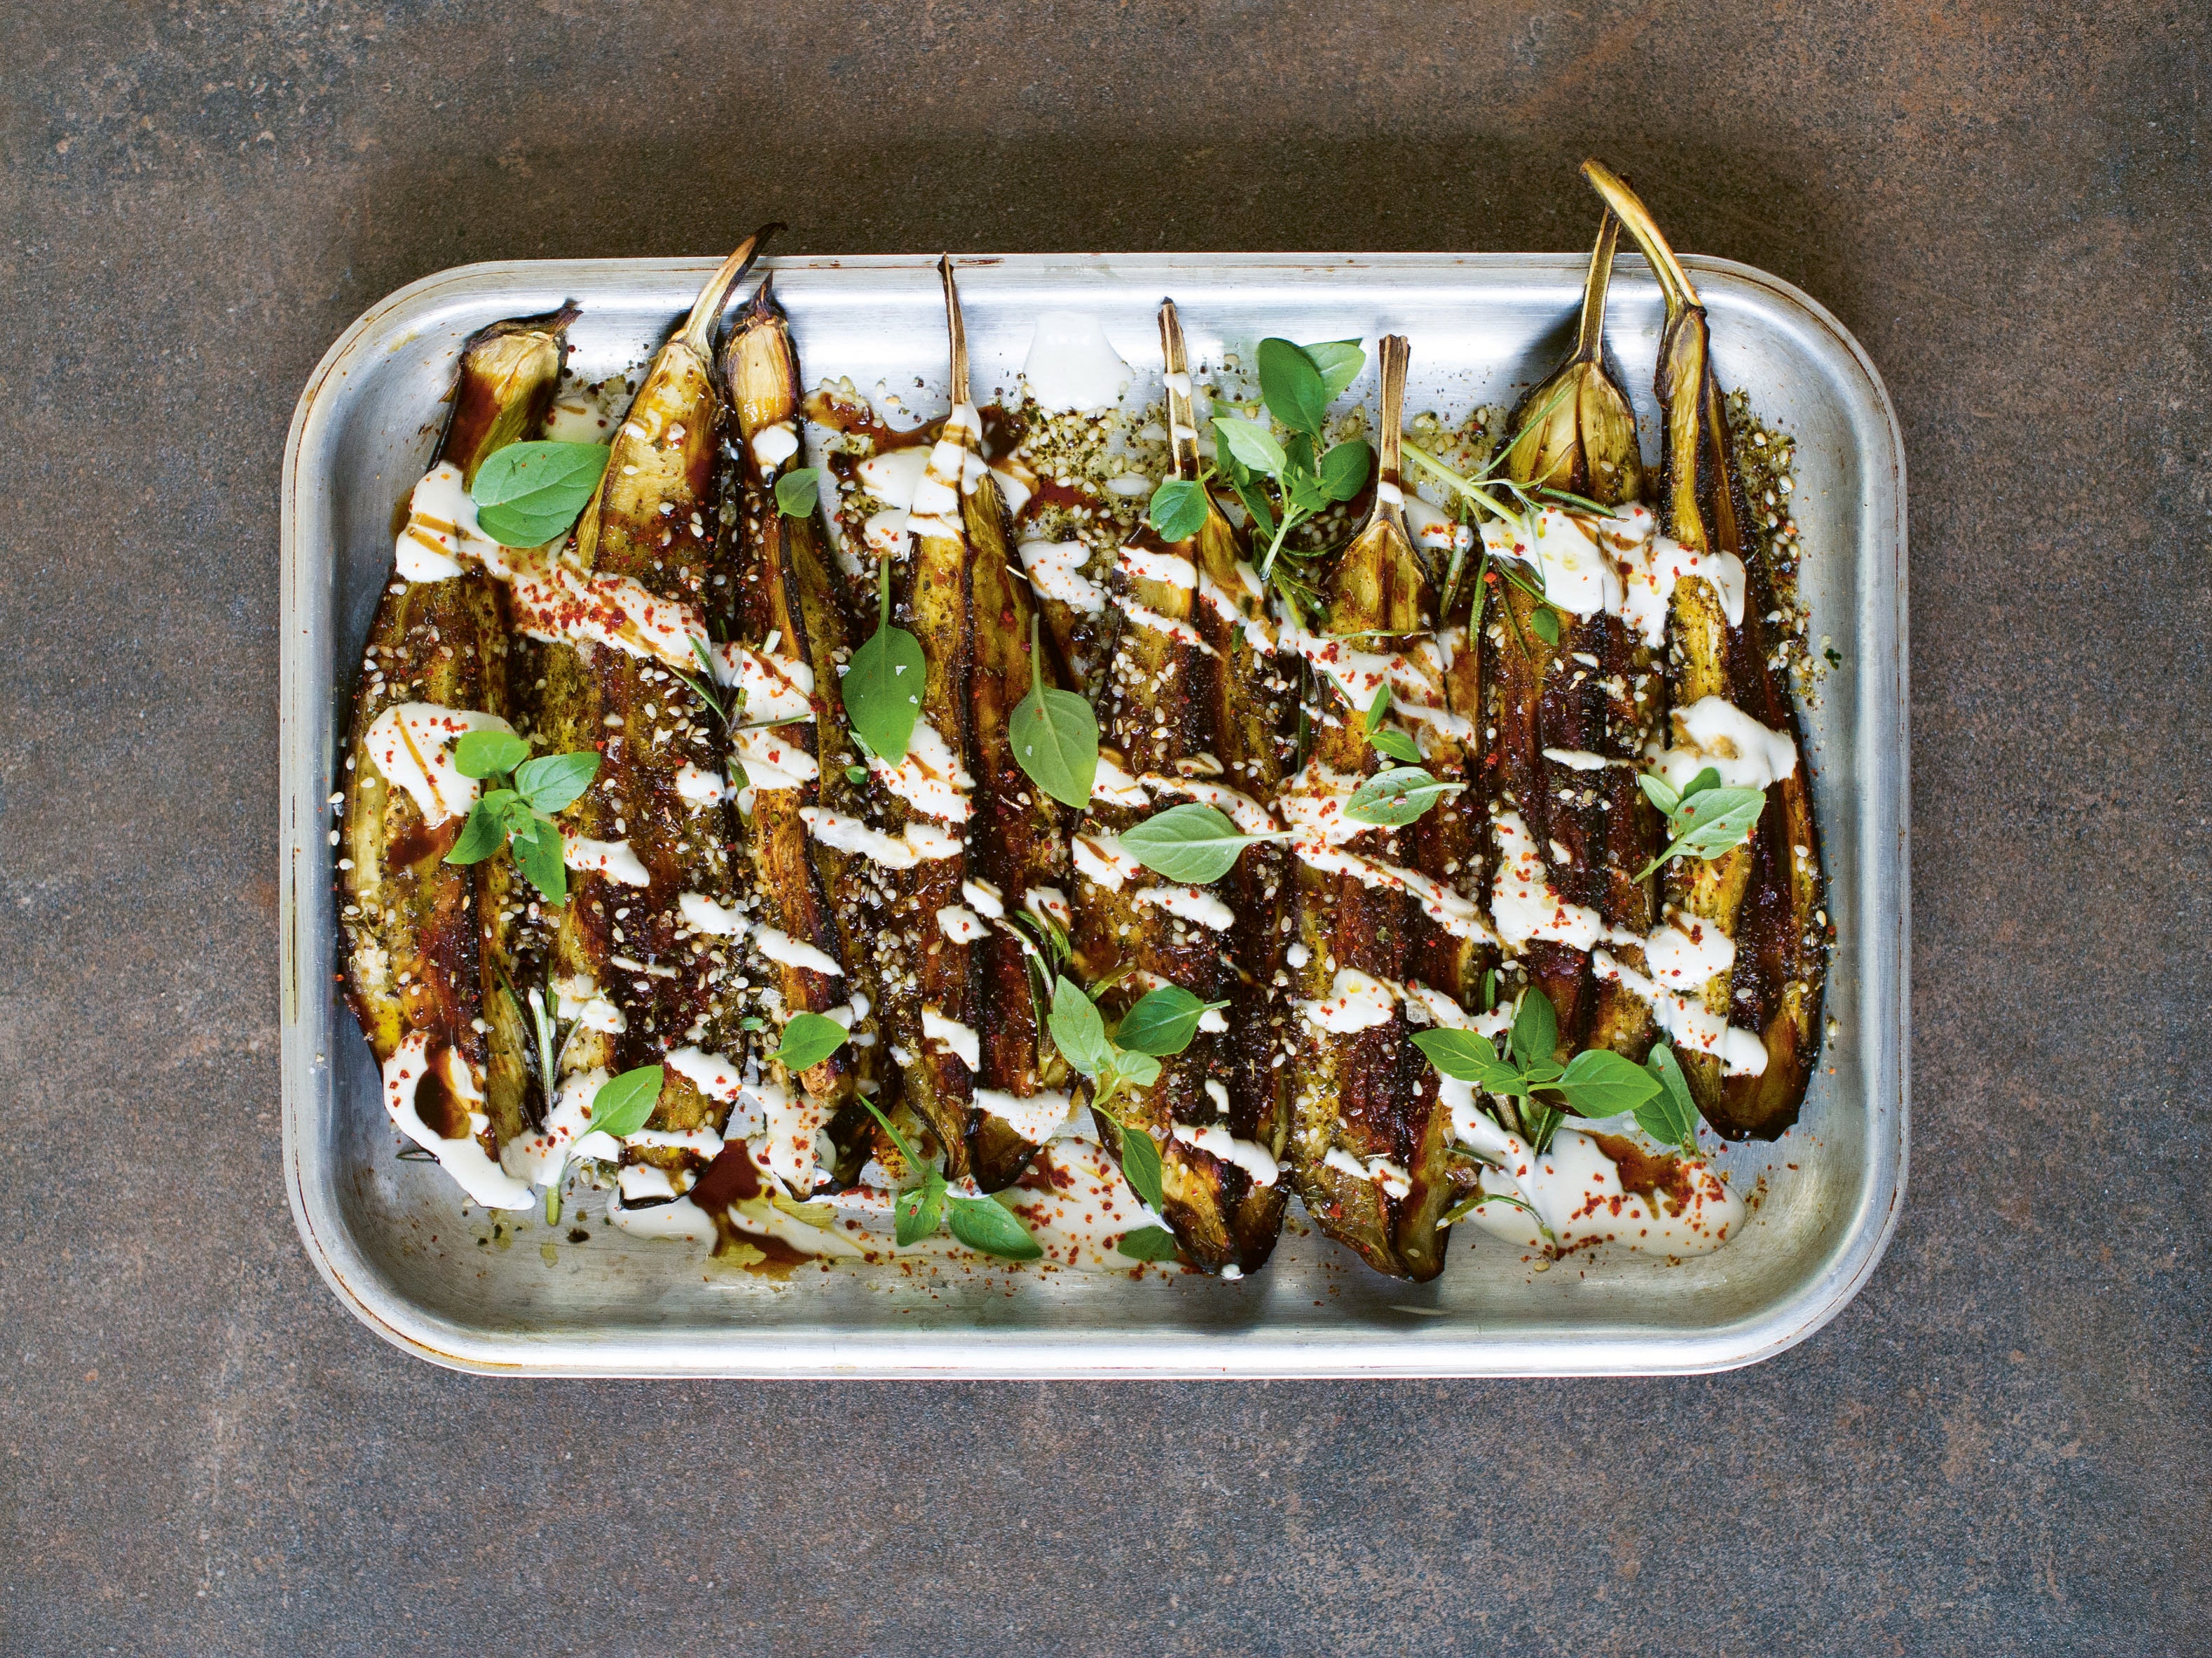 Diacono’s favourite way with aubergines, and one that shows how they take beautifully to so many herbs